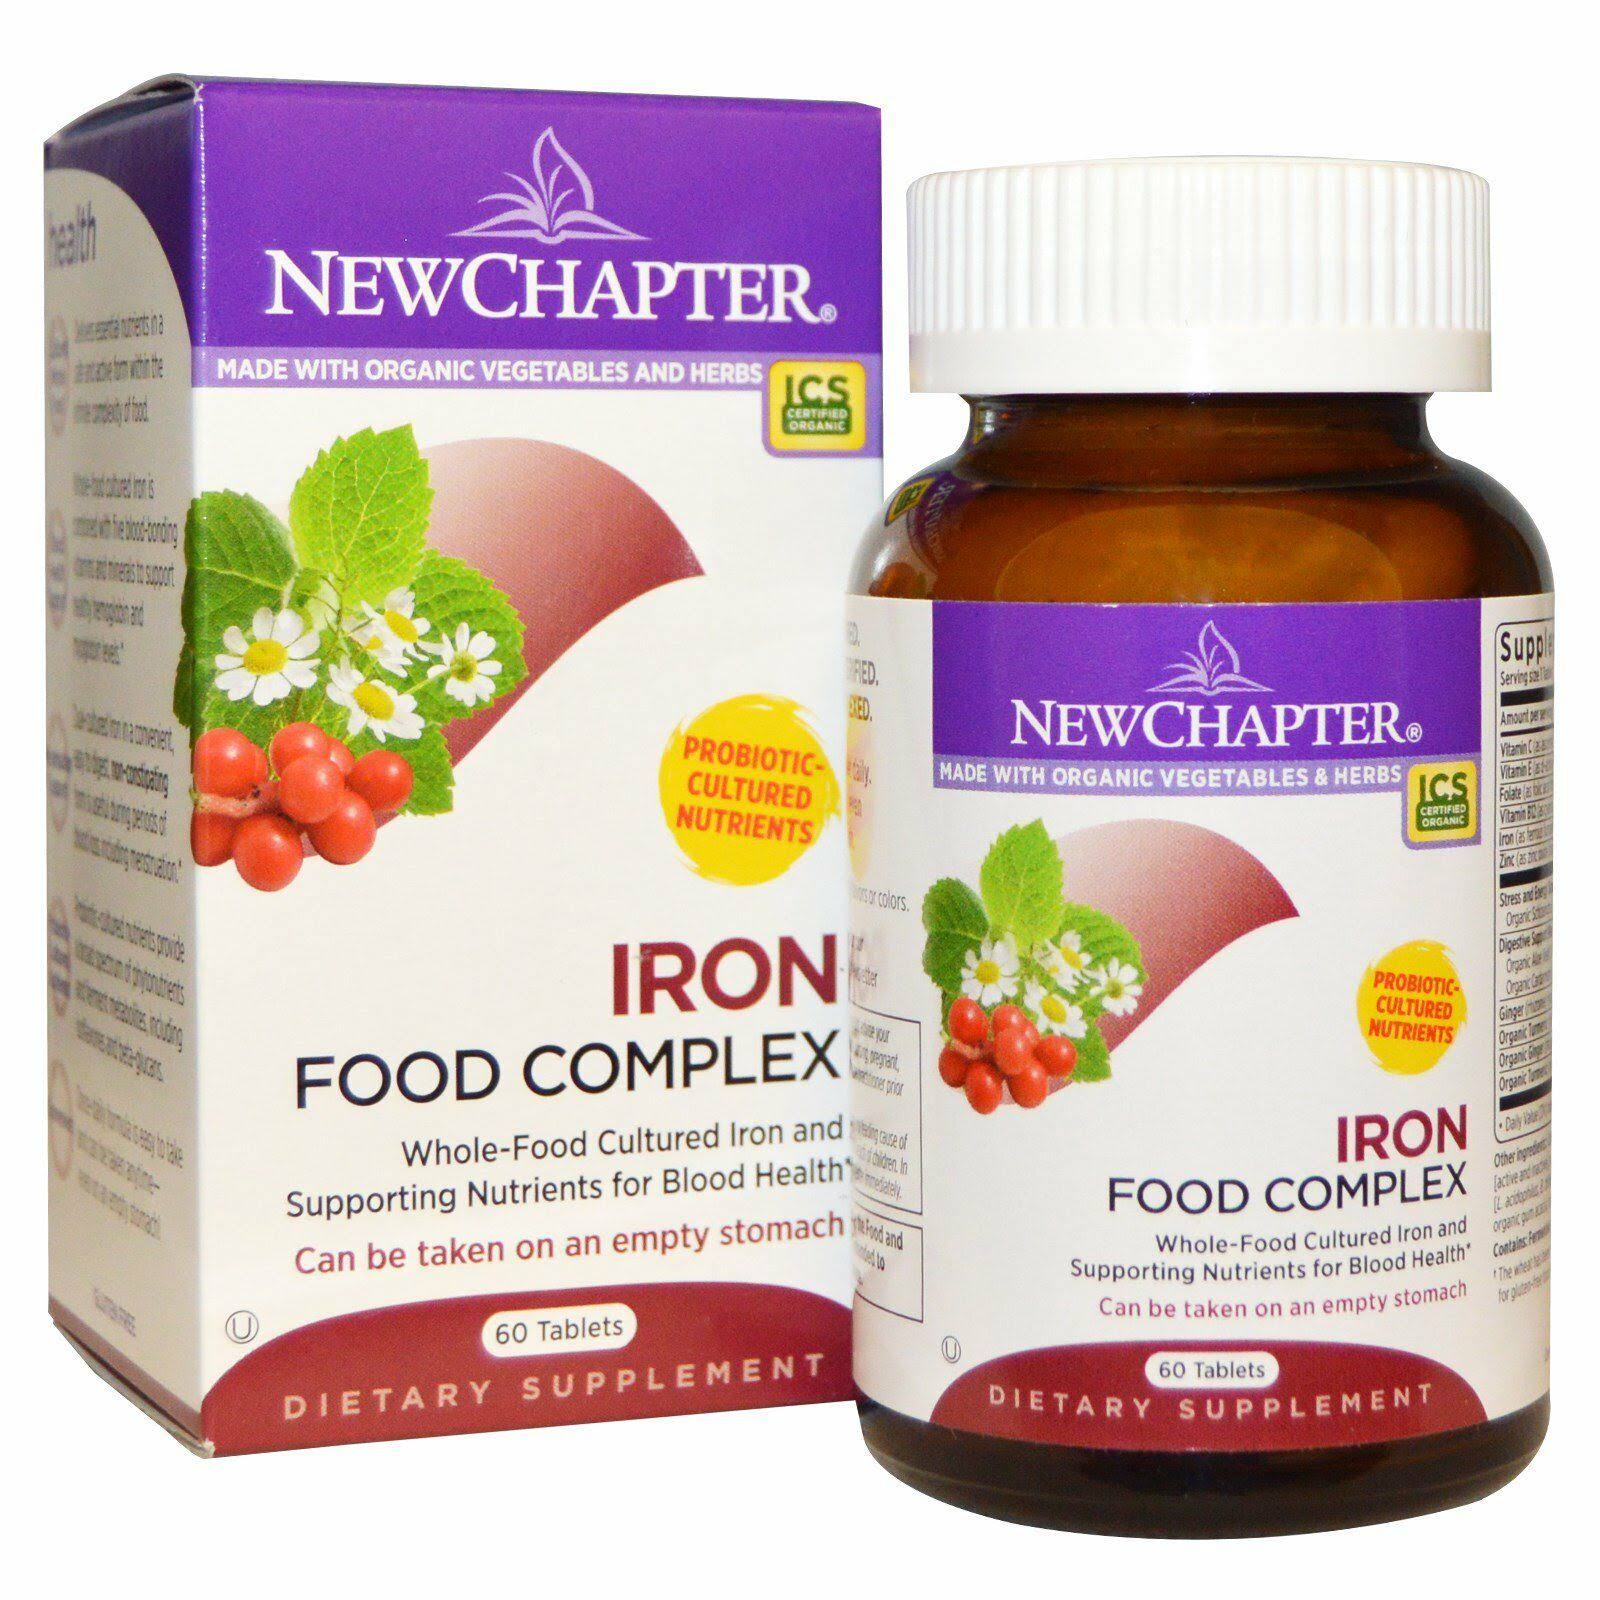 New Chapter Iron Food Complex Supplement - 60 Tablets